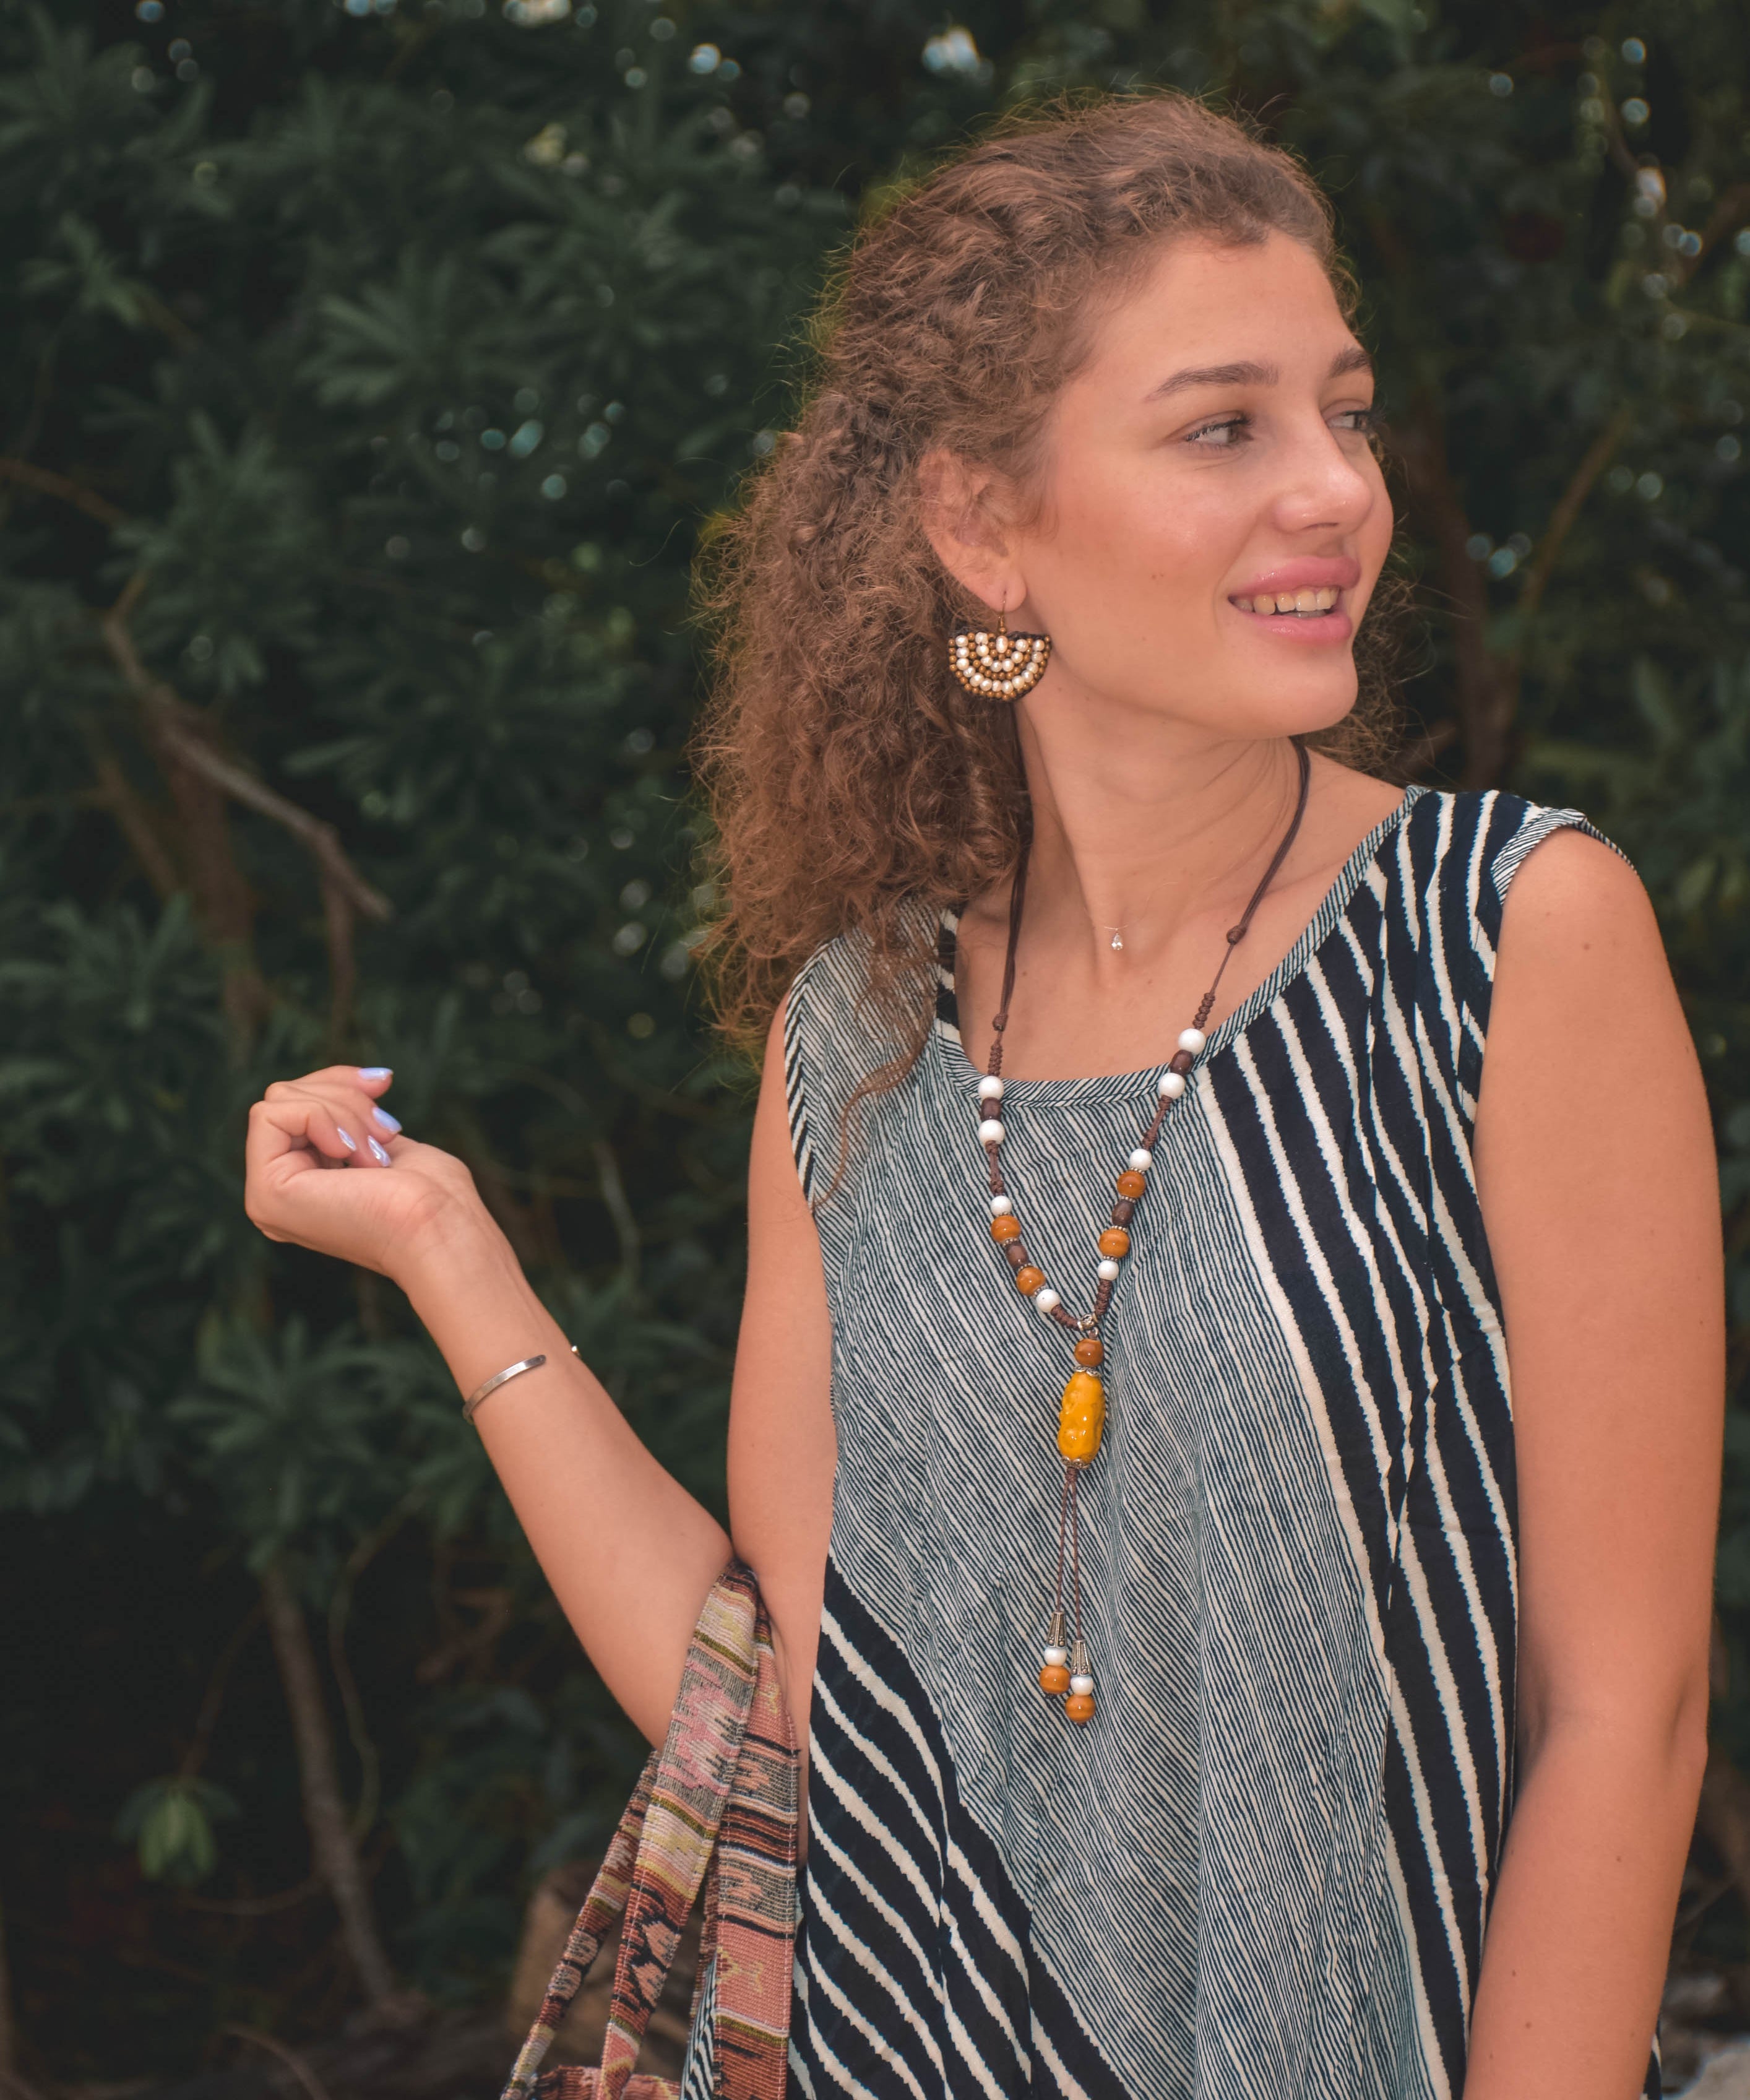 GIZA EARRINGS Elepanta Earrings - Buy Today Elephant Pants Jewelry And Bohemian Clothes Handmade In Thailand Help To Save The Elephants FairTrade And Vegan